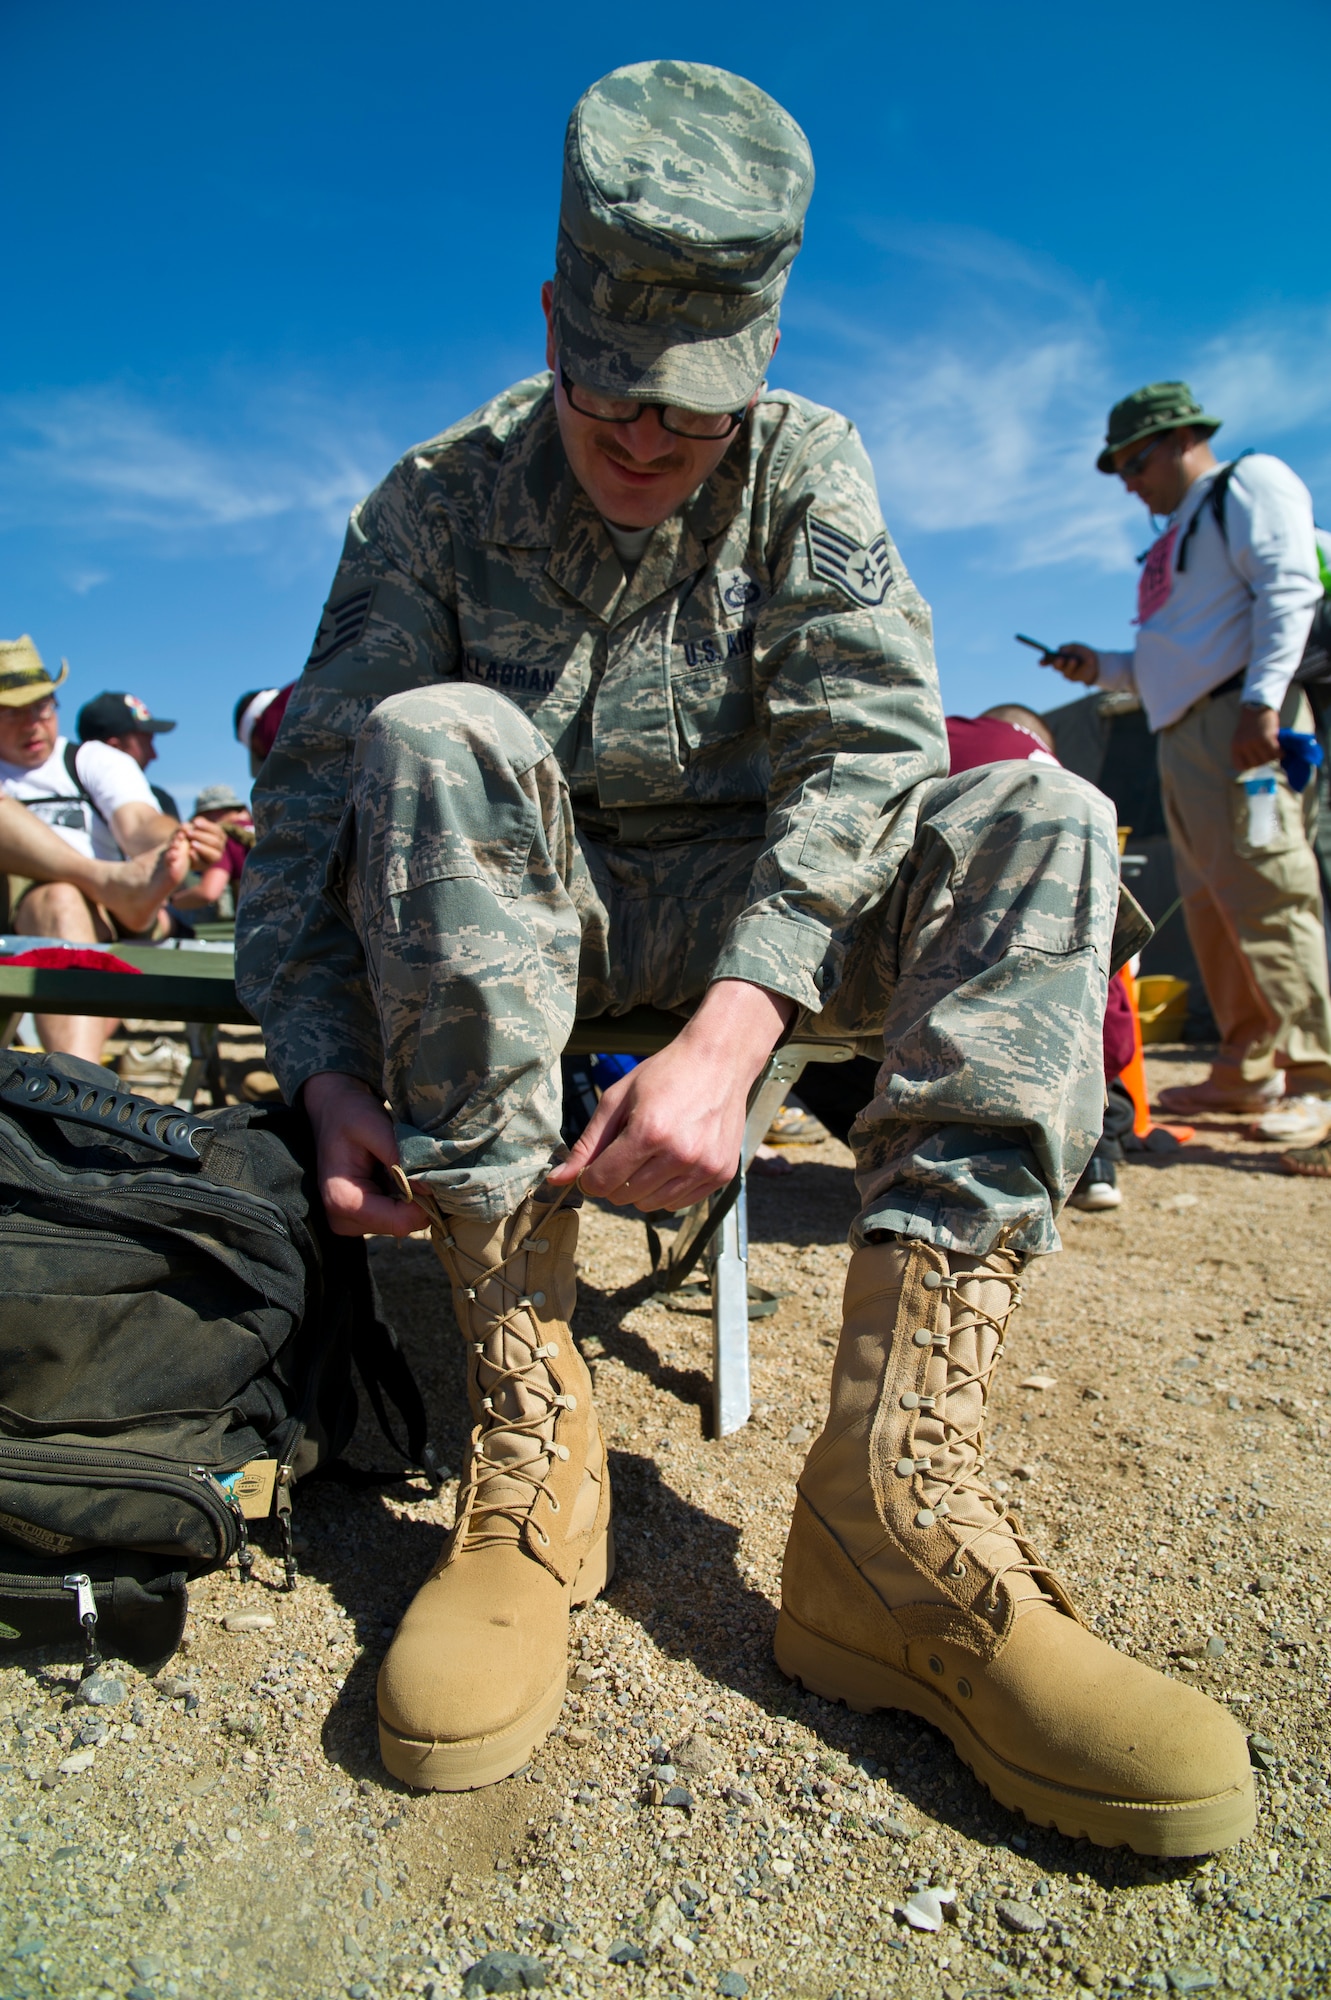 WHITE SANDS MISSILE RANGE, N.M. – U.S. Air Force Staff Sgt. Mark Villagran, 550th Special Operations Squadron aviation resource manager from Kirtland Air Force Base, N.M., laces up his boot after checking for blisters at a rest stop along the course of the Bataan Memorial Death March here March 25. Ricardo Gutierrez, 37, of Converse, Texas, finished the 26.2-mile marathon first in the military - light category, with a chip time of 4:21:35; Toby Angove, 39, of Indiana, Pa., finished first in the military - heavy category, with a chip time of 4:40:29. (U.S. Air Force photo by Airman 1st Class Daniel E. Liddicoet/Released)